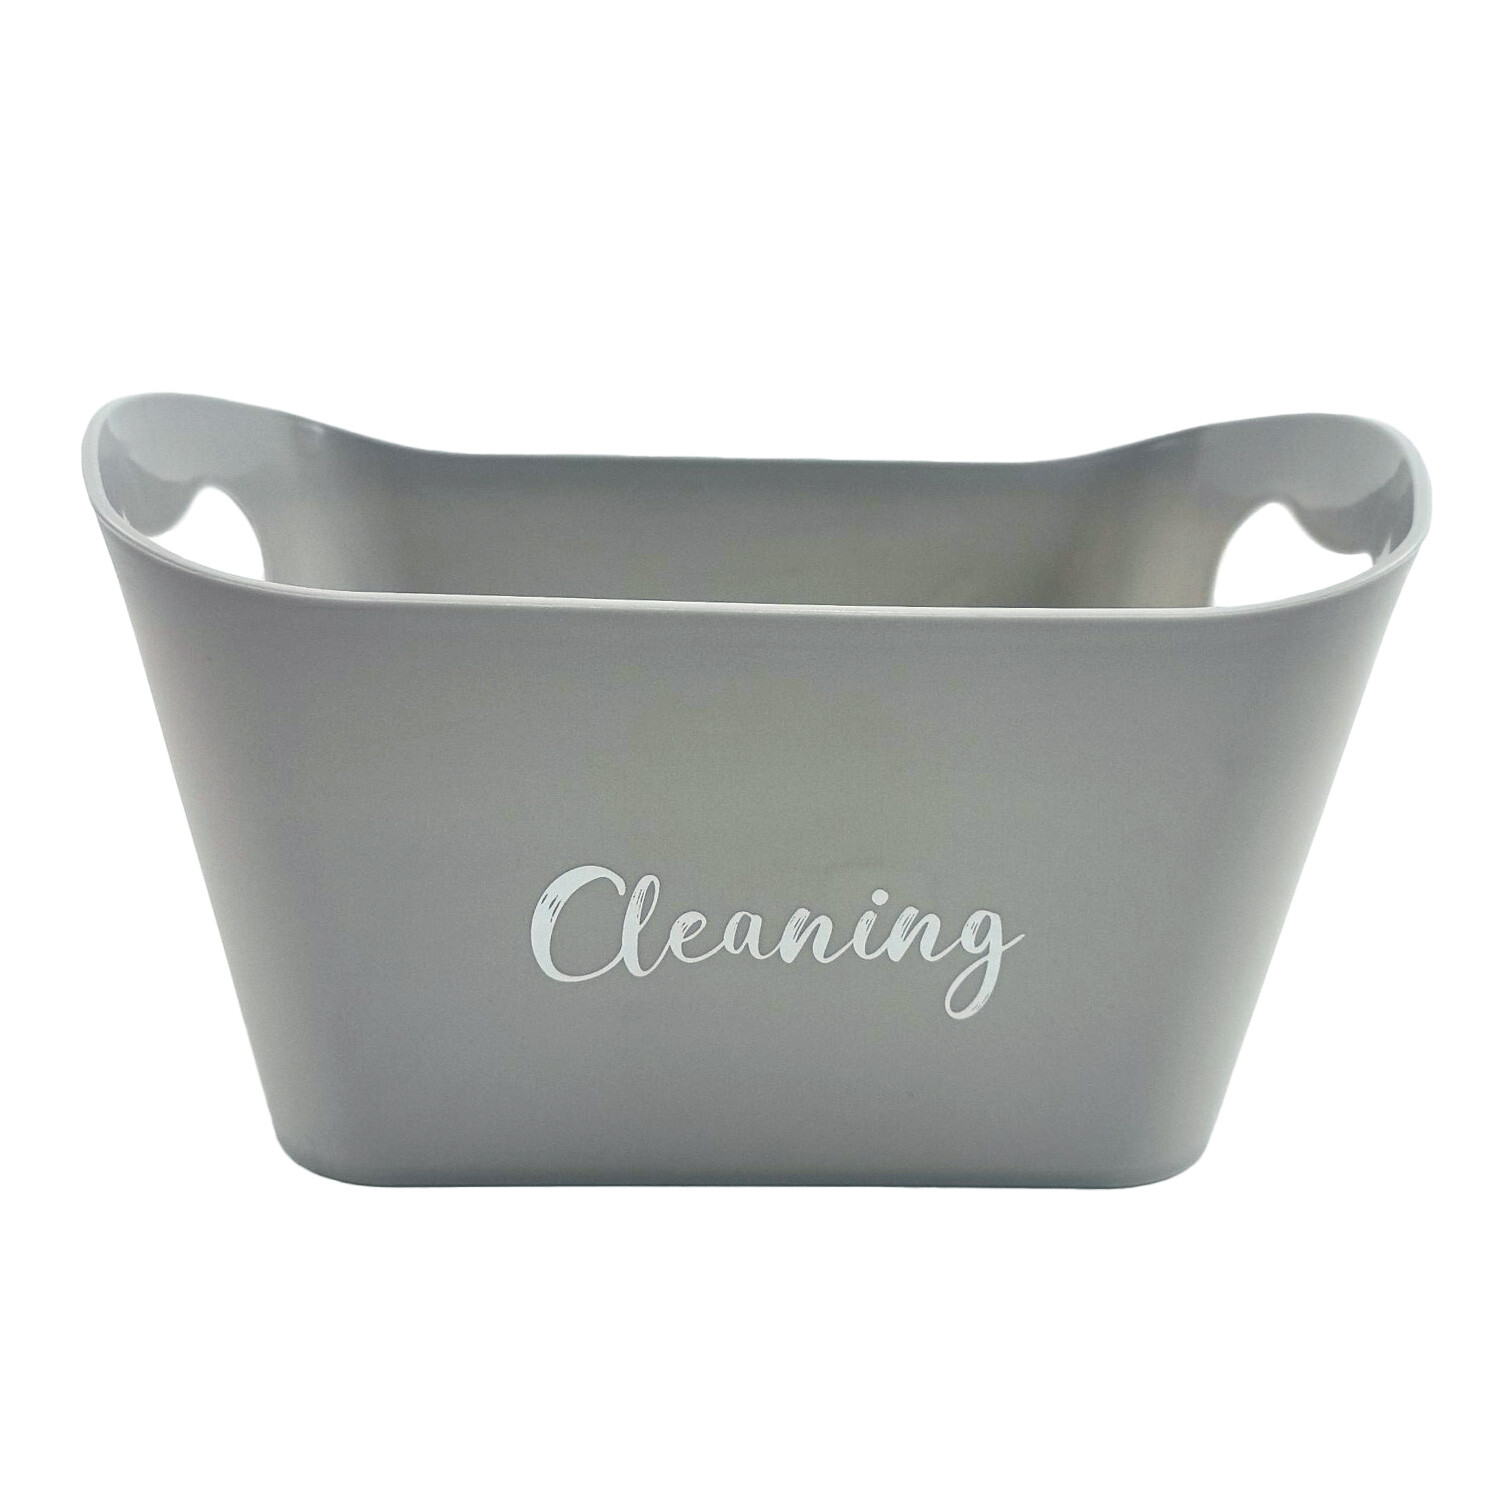 Cleaning Storage Caddy - Grey Image